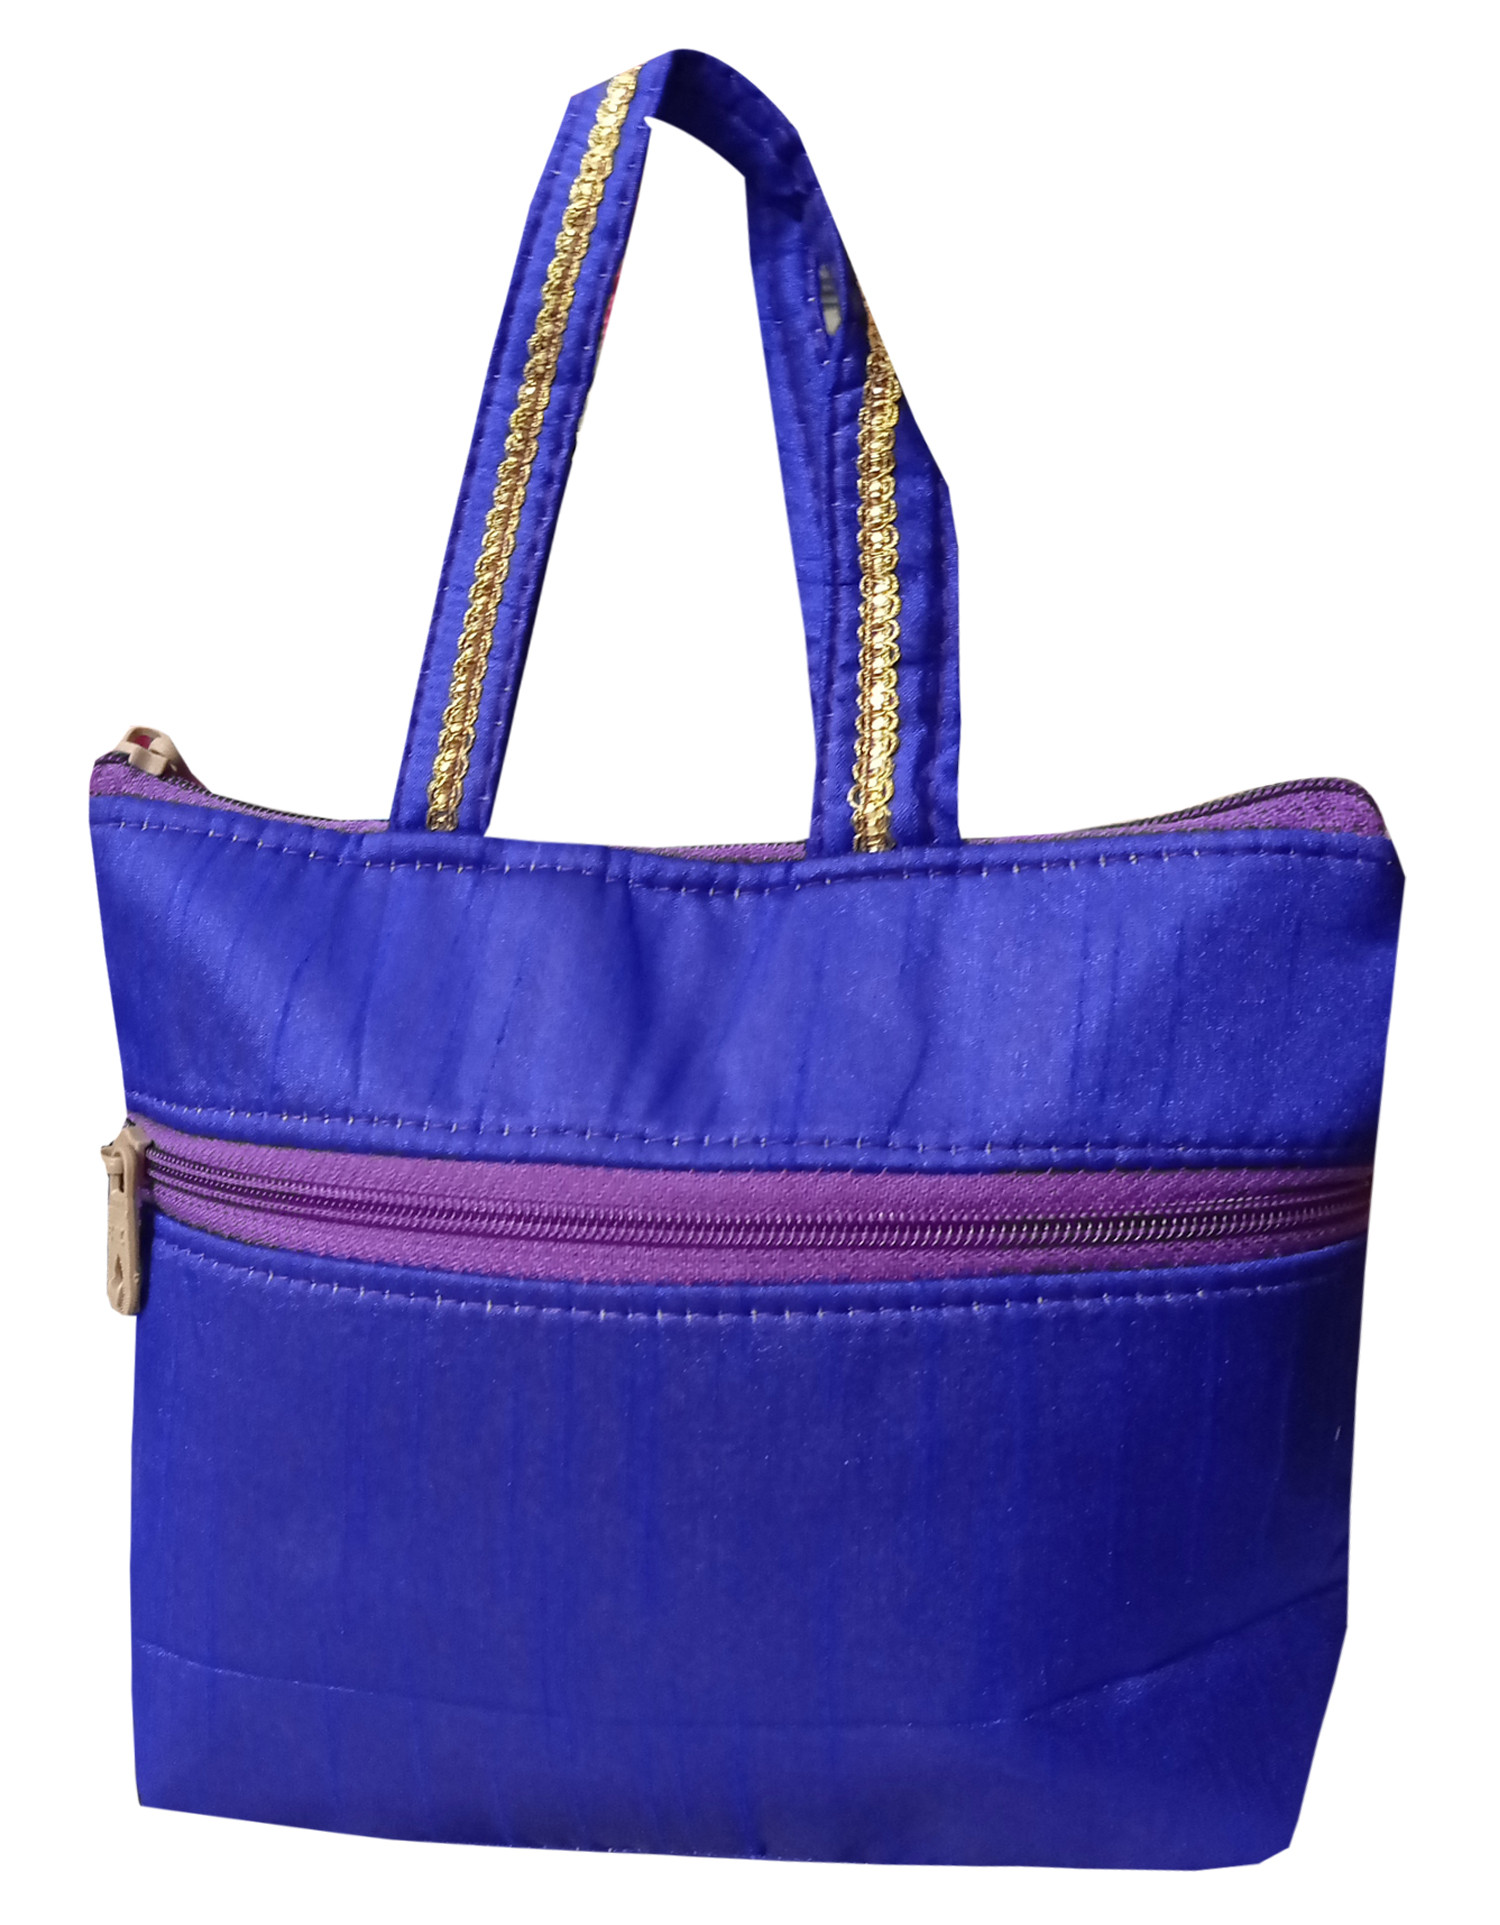 Kuber Industries Embroidery Small Hand Bag, Tote Bag, Purse For Daily Trips, Travel, Office & All Occasions For Women & Girls (Blue)-HS_38_KUBMART21475